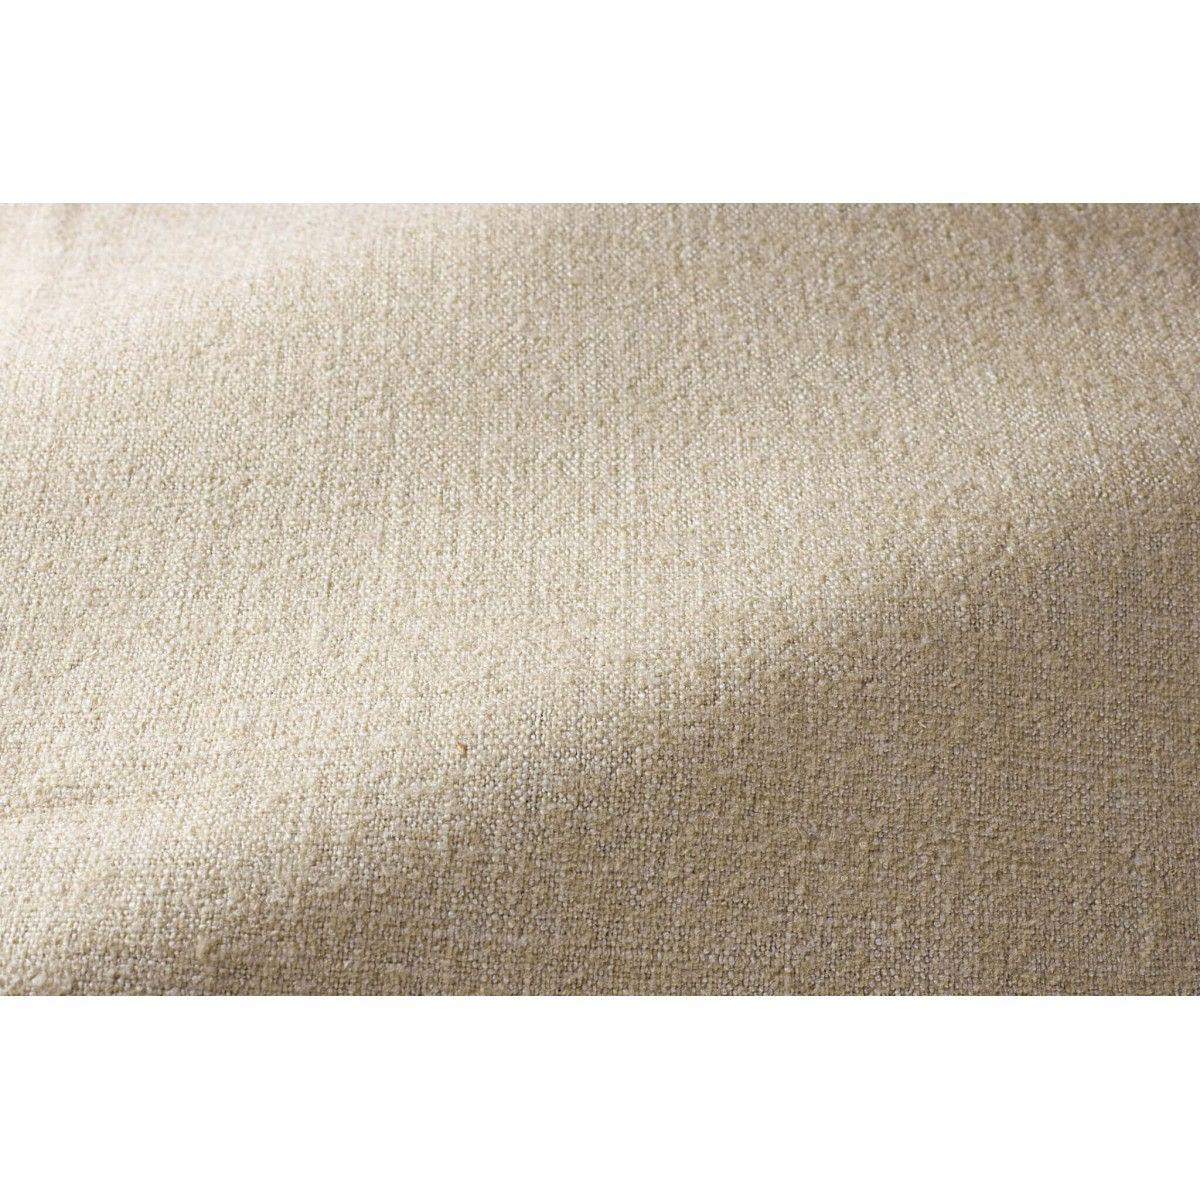 Popus Editions Giovanna 4 Seater Sofa in Macadamia London Linen Fabric

Giovanna is a sofa with a strong profile. A sober, plush line, with this famous detail that changes everything, so as not to forget its strength of character and this charming